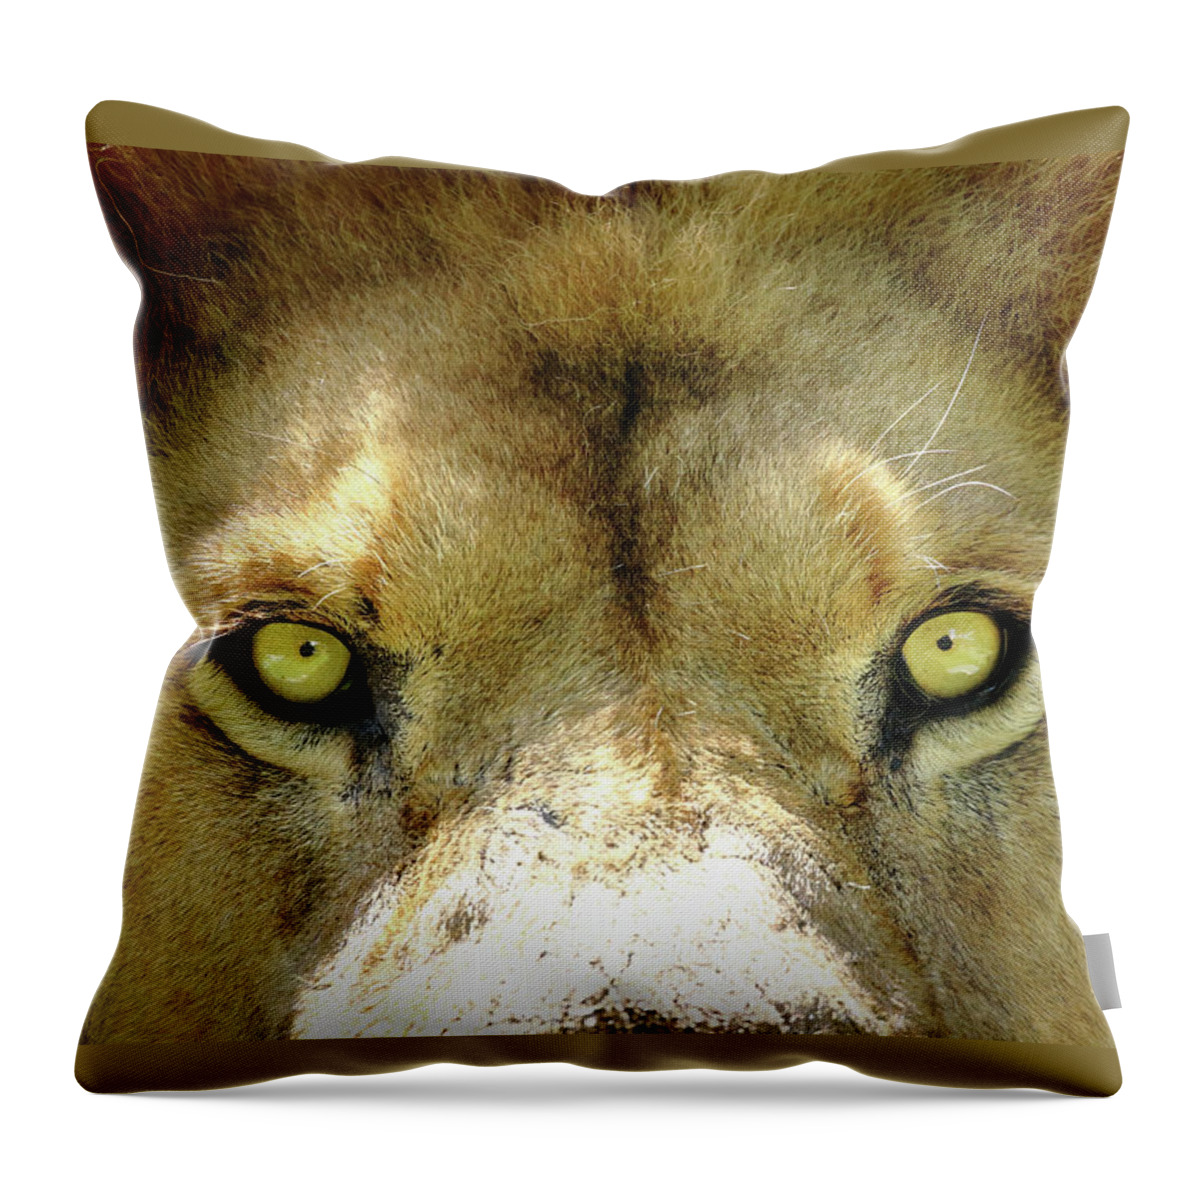 Lion Throw Pillow featuring the photograph Stare Down by Lens Art Photography By Larry Trager